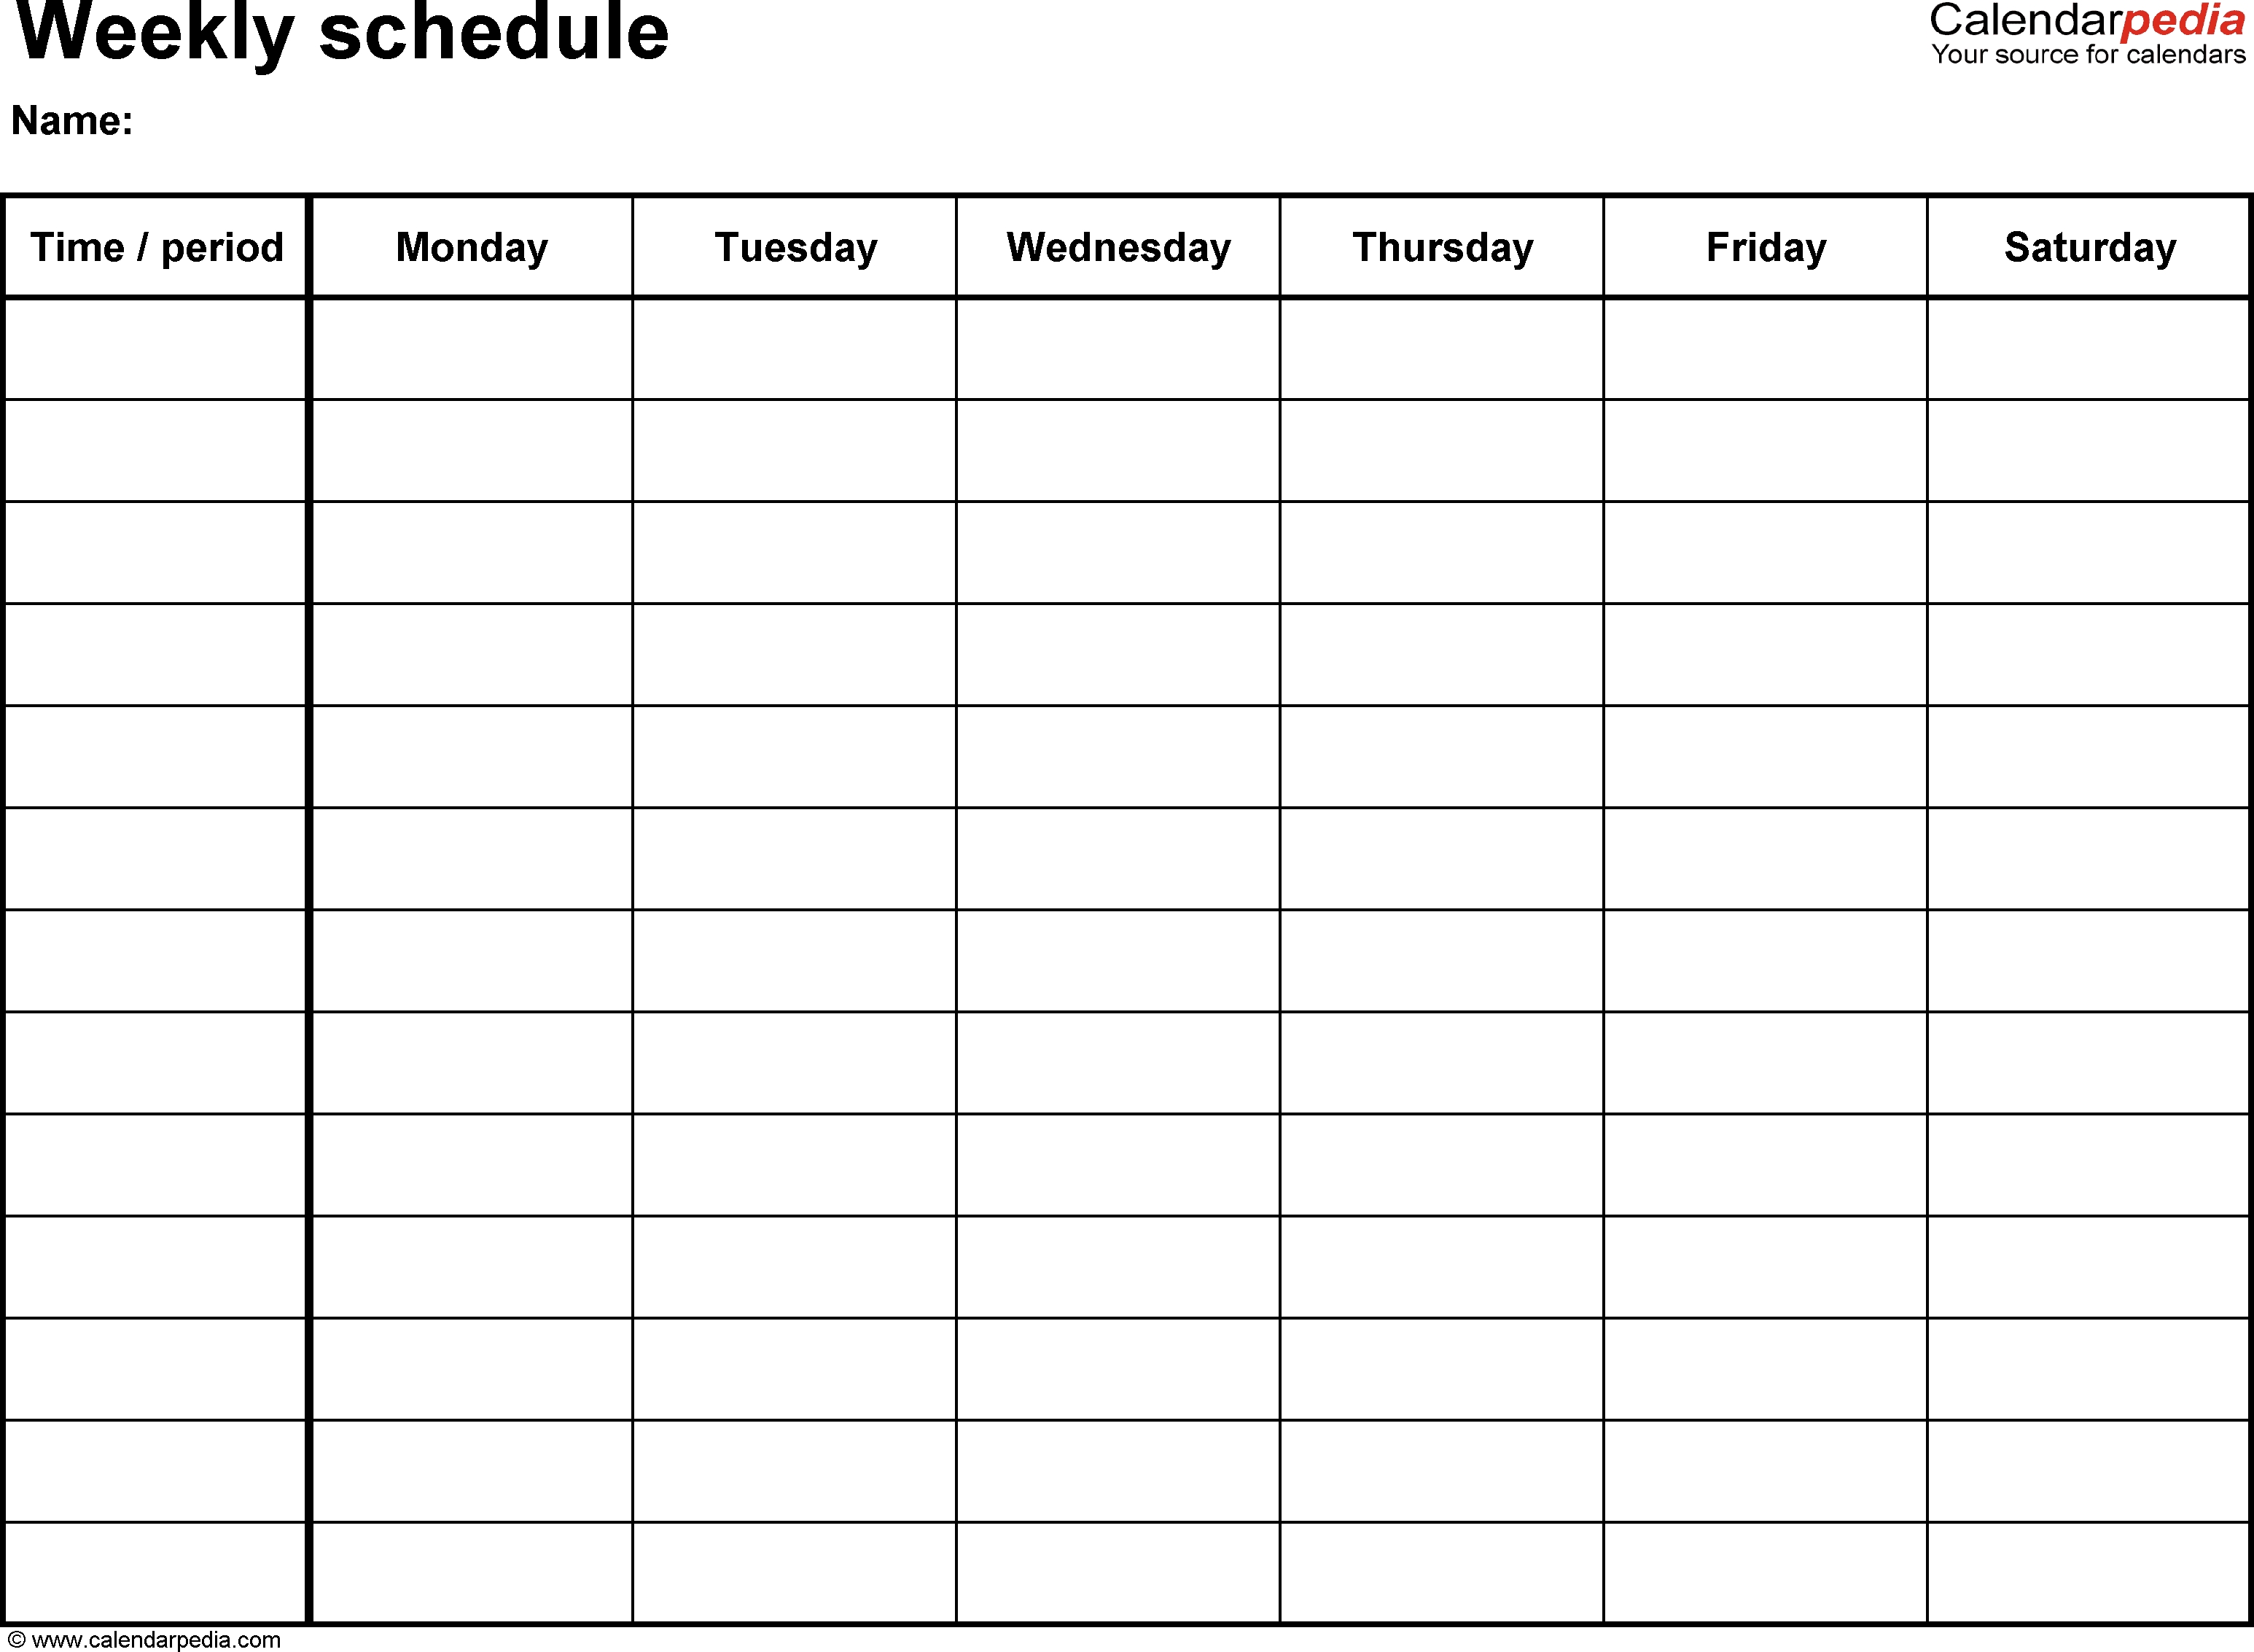 Free Weekly Schedule Templates For Word - 18 Templates Monday To Friday Calendar Template